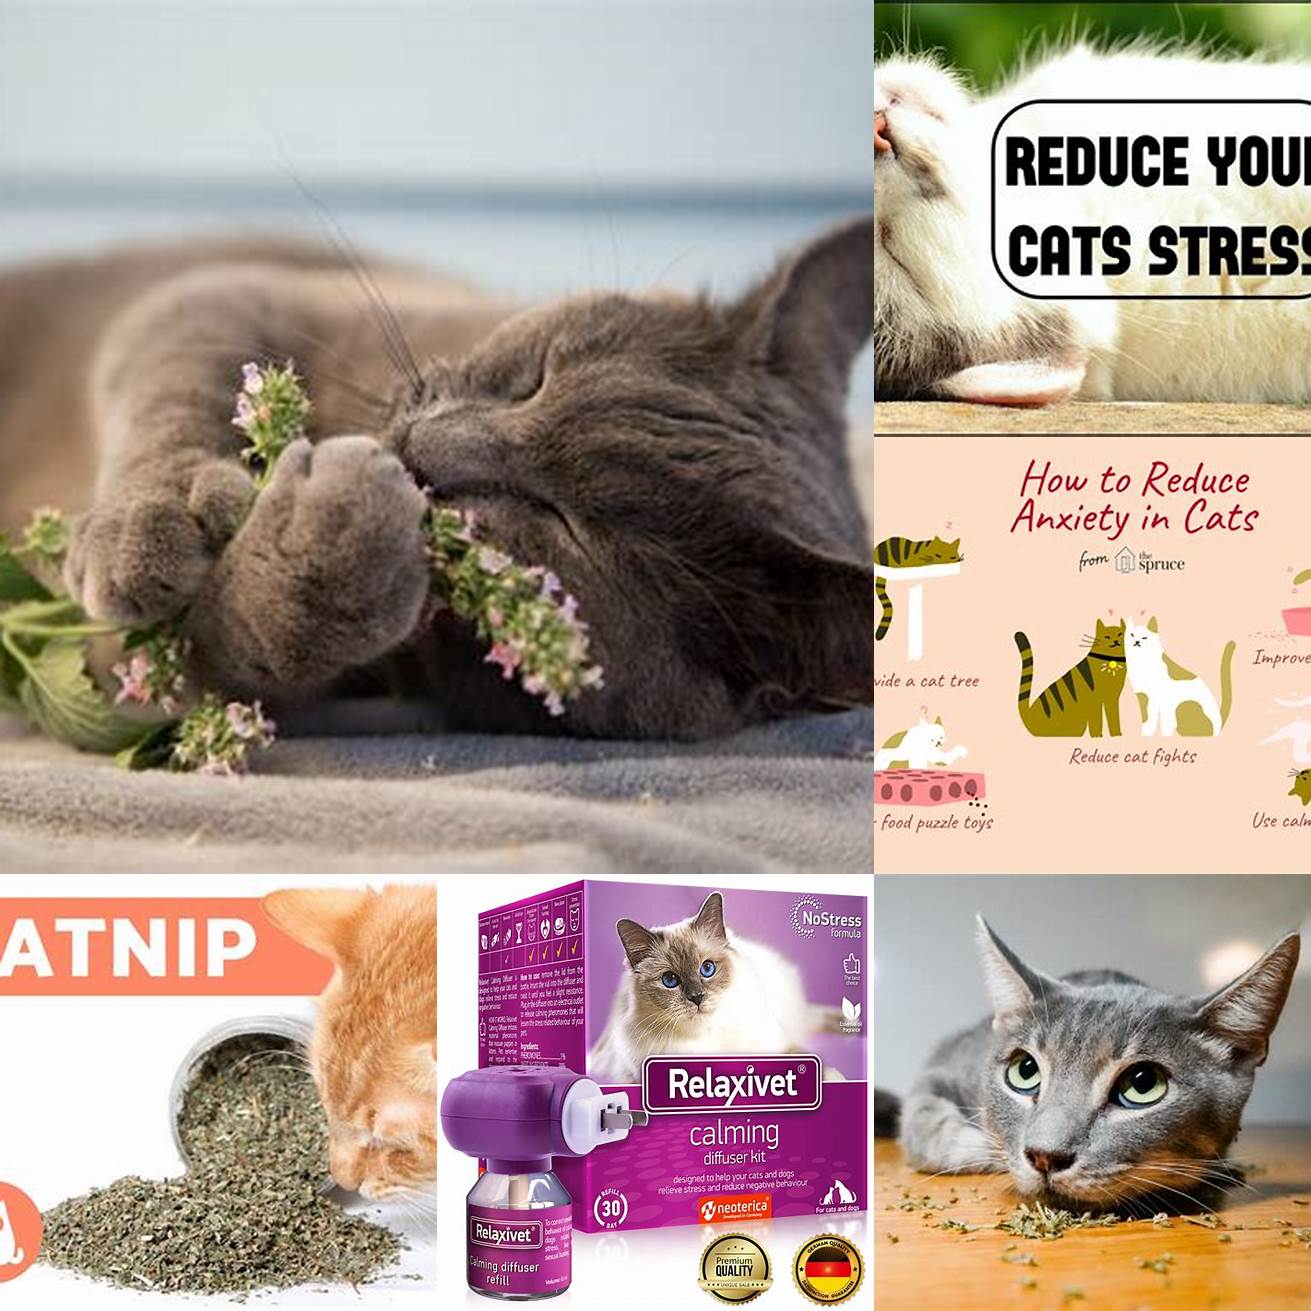 Reducing anxiety and stress The euphoric effect of catnip can help calm down anxious or stressed cats